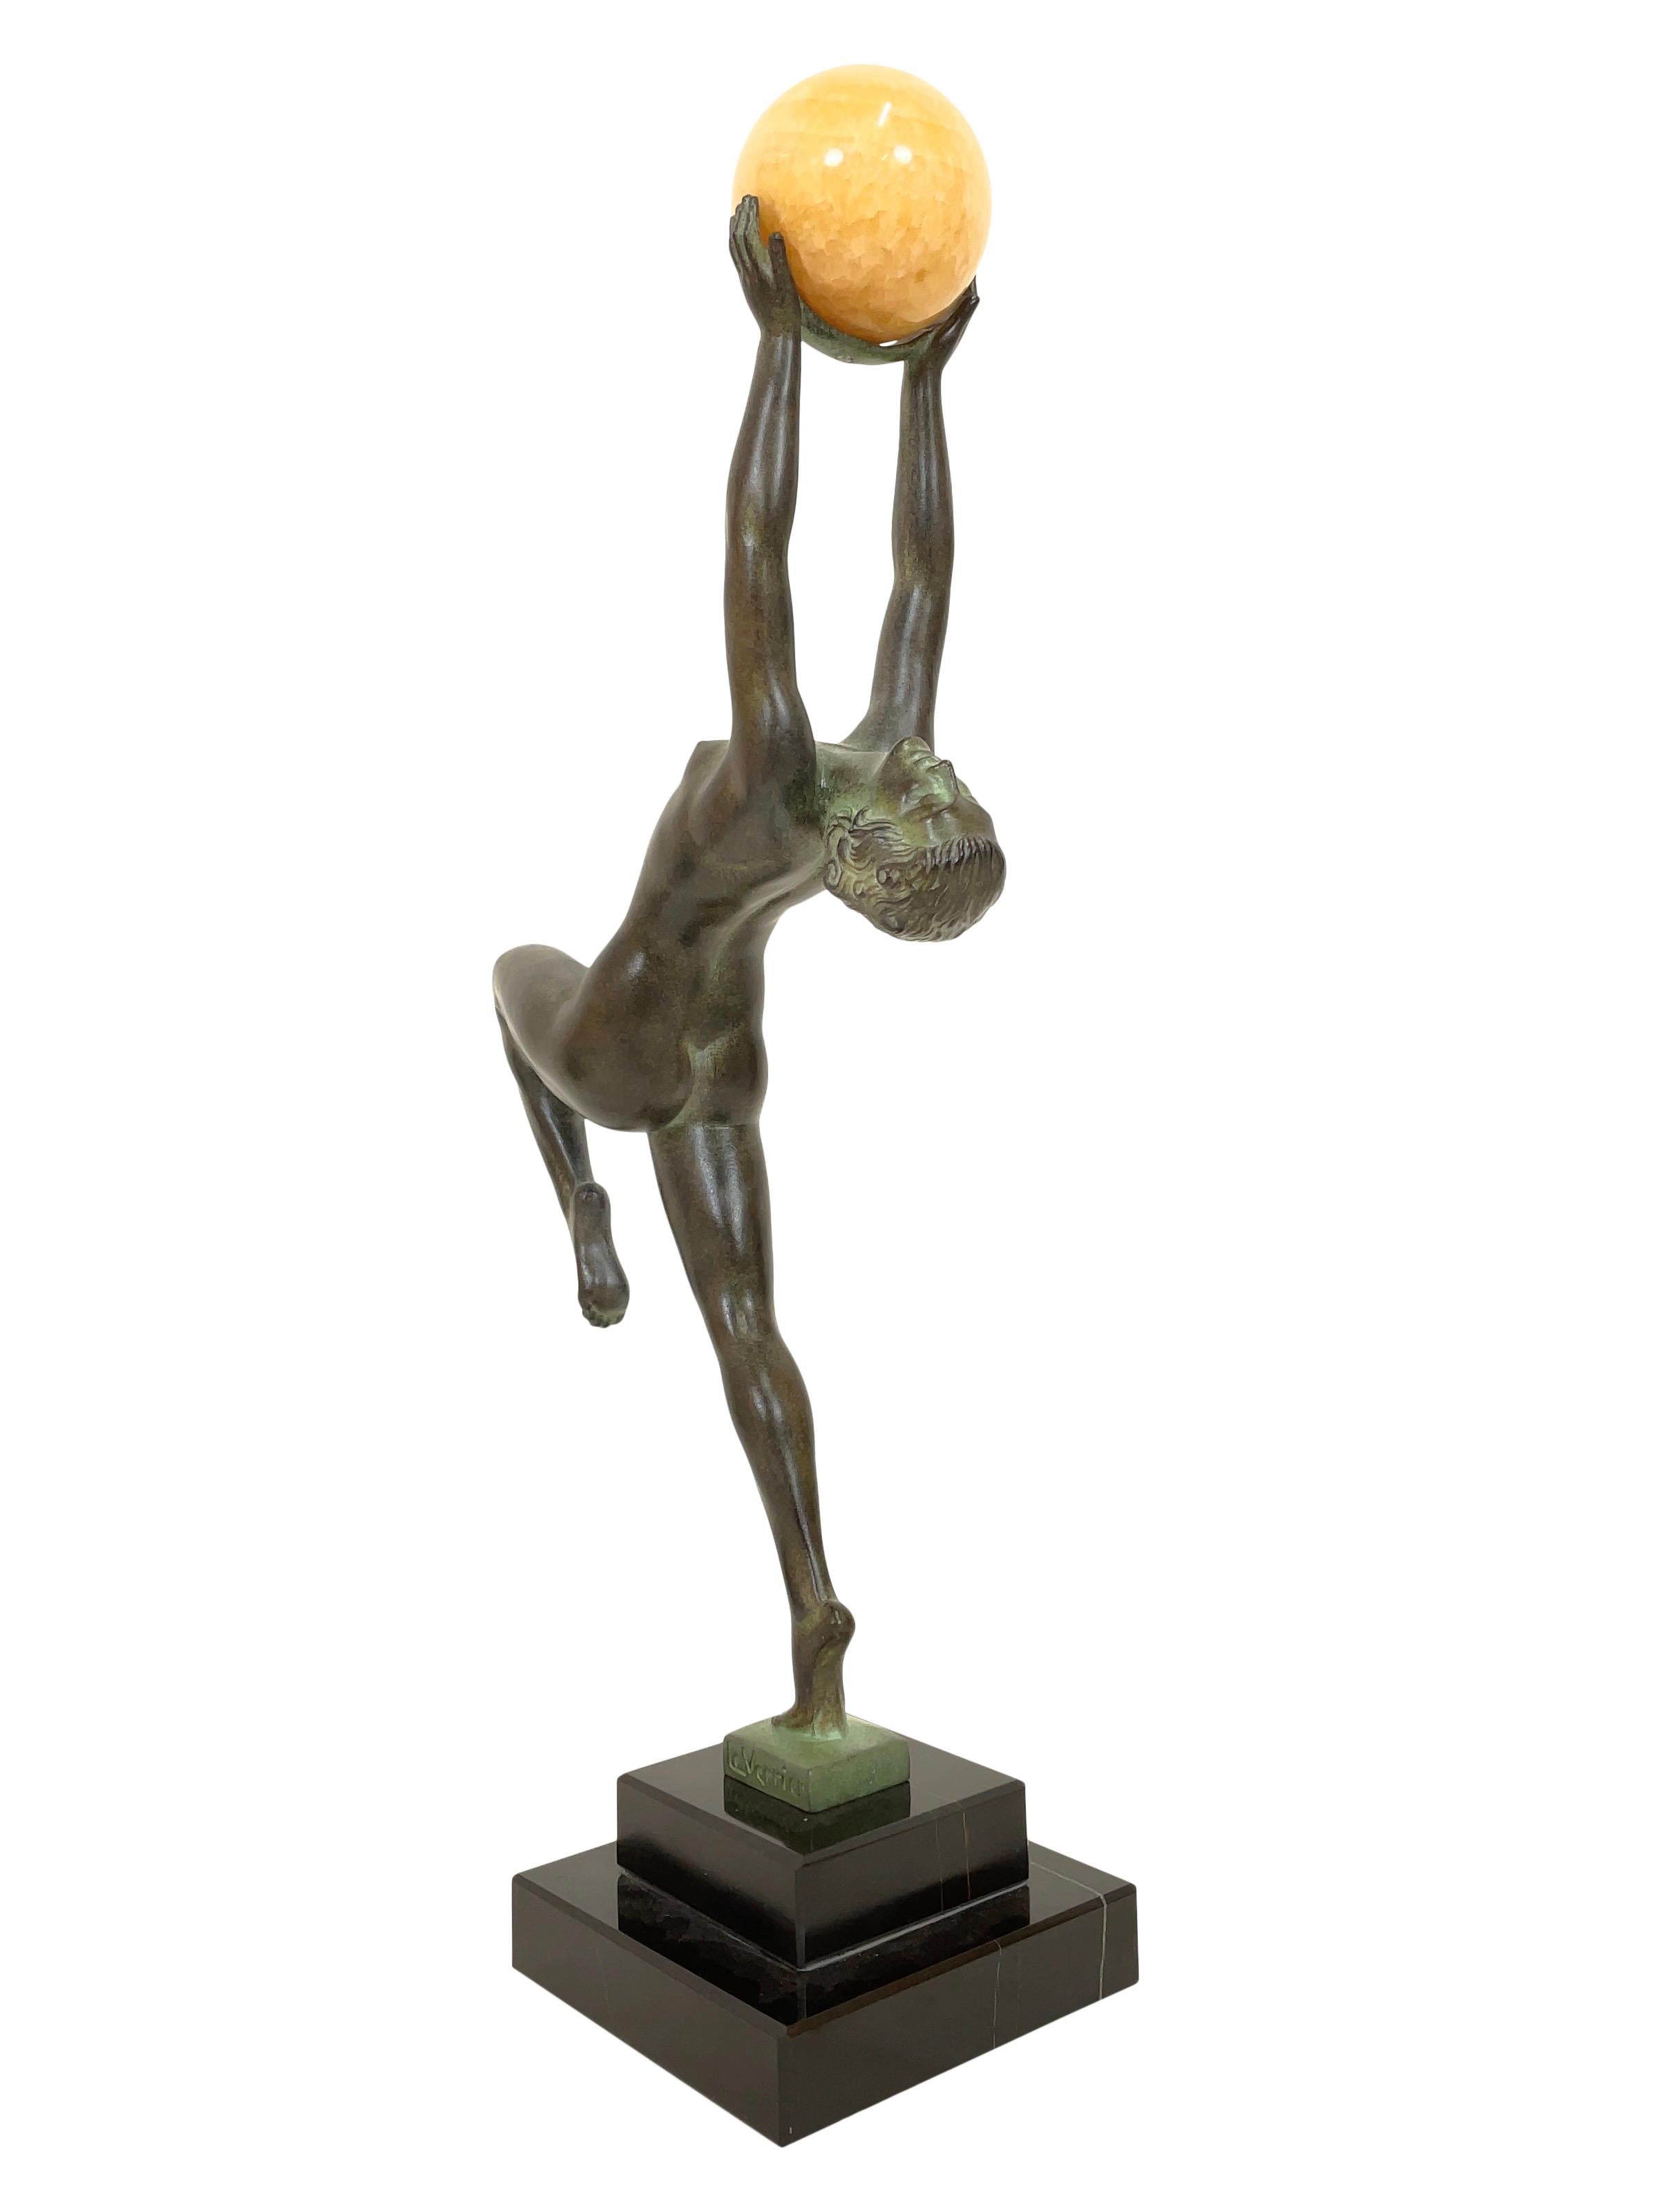 Contemporary Dancer Sculpture Jeu with a Jade Ball from Max Le Verrier in Art Deco Style